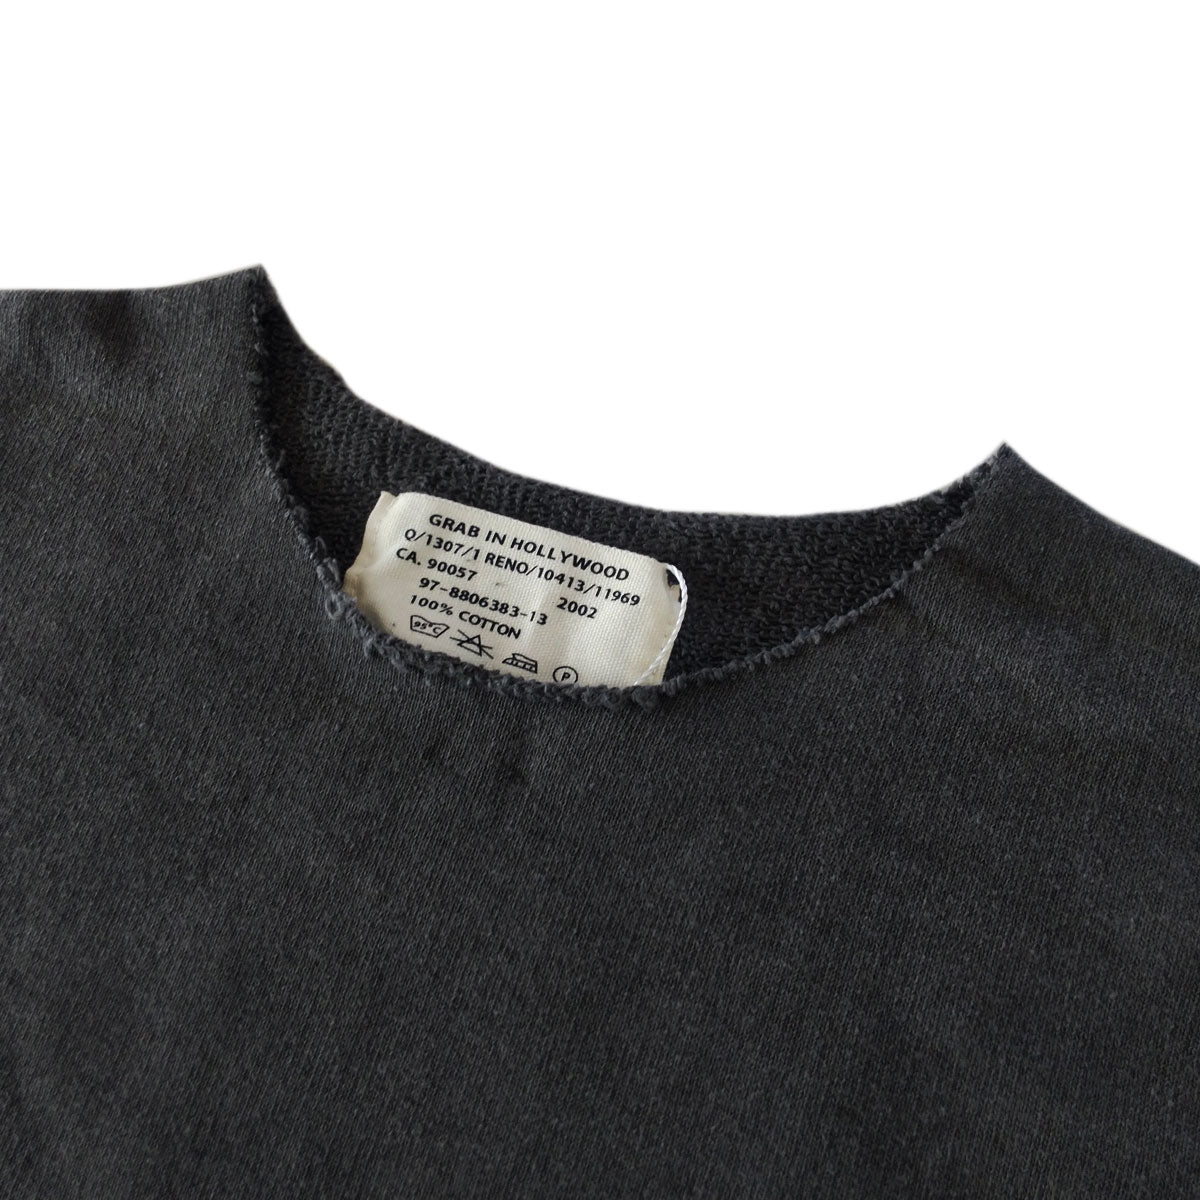 VINTAGE FRENCH TERRY RELAX FIT ALL CUT L/S[ビンテージフレンチテリー リラックスフィット オールカット長袖]PIG BLK